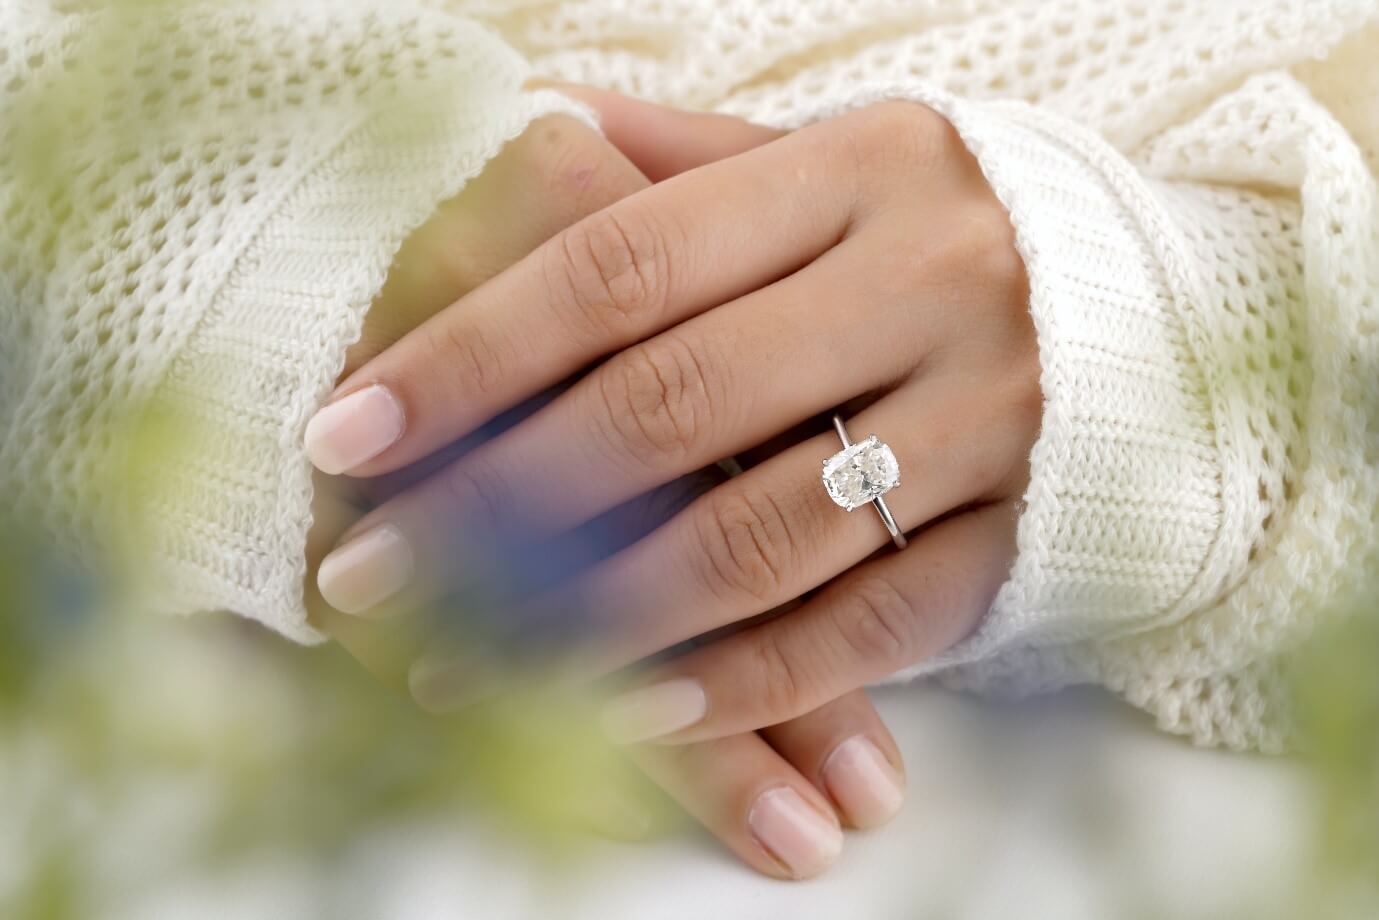 Engagement rings trends to look out for in 2022